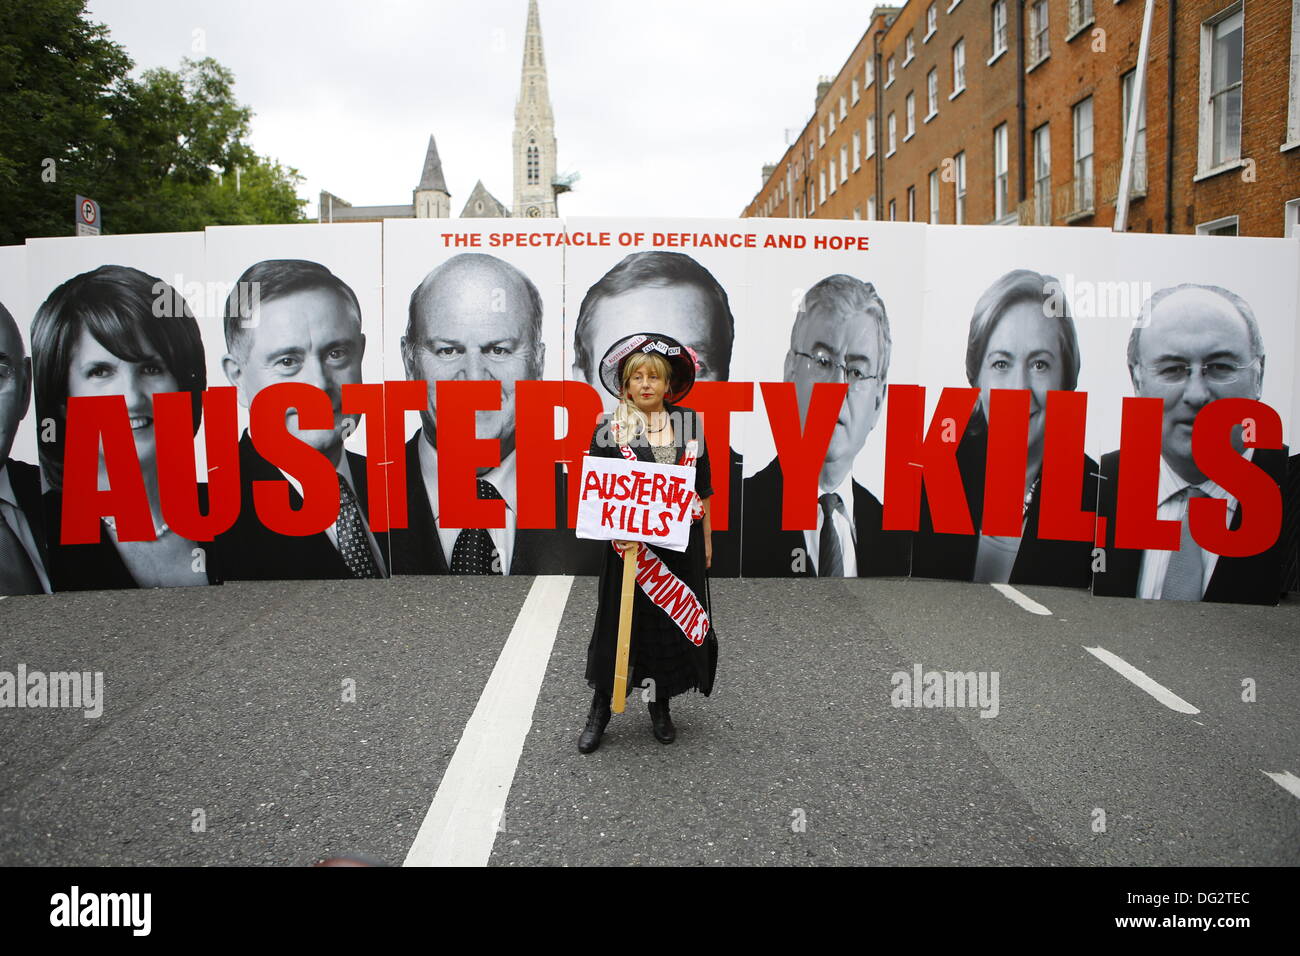 Dublin, Ireland. 12th October 2013. Members of the Spectacle of Defiance & Hope hold large signs with pictures of government ministers and reads 'Austerity Kills'. A female member walks in front of the signs. Unions called for a protest march through Dublin, ahead of the announcing of the 2014 budget next week. They protested against cuts in Social Welfare, Health and Education and for an utilisation of alternative revenue sources by the government. © Michael Debets/Alamy Live News Stock Photo